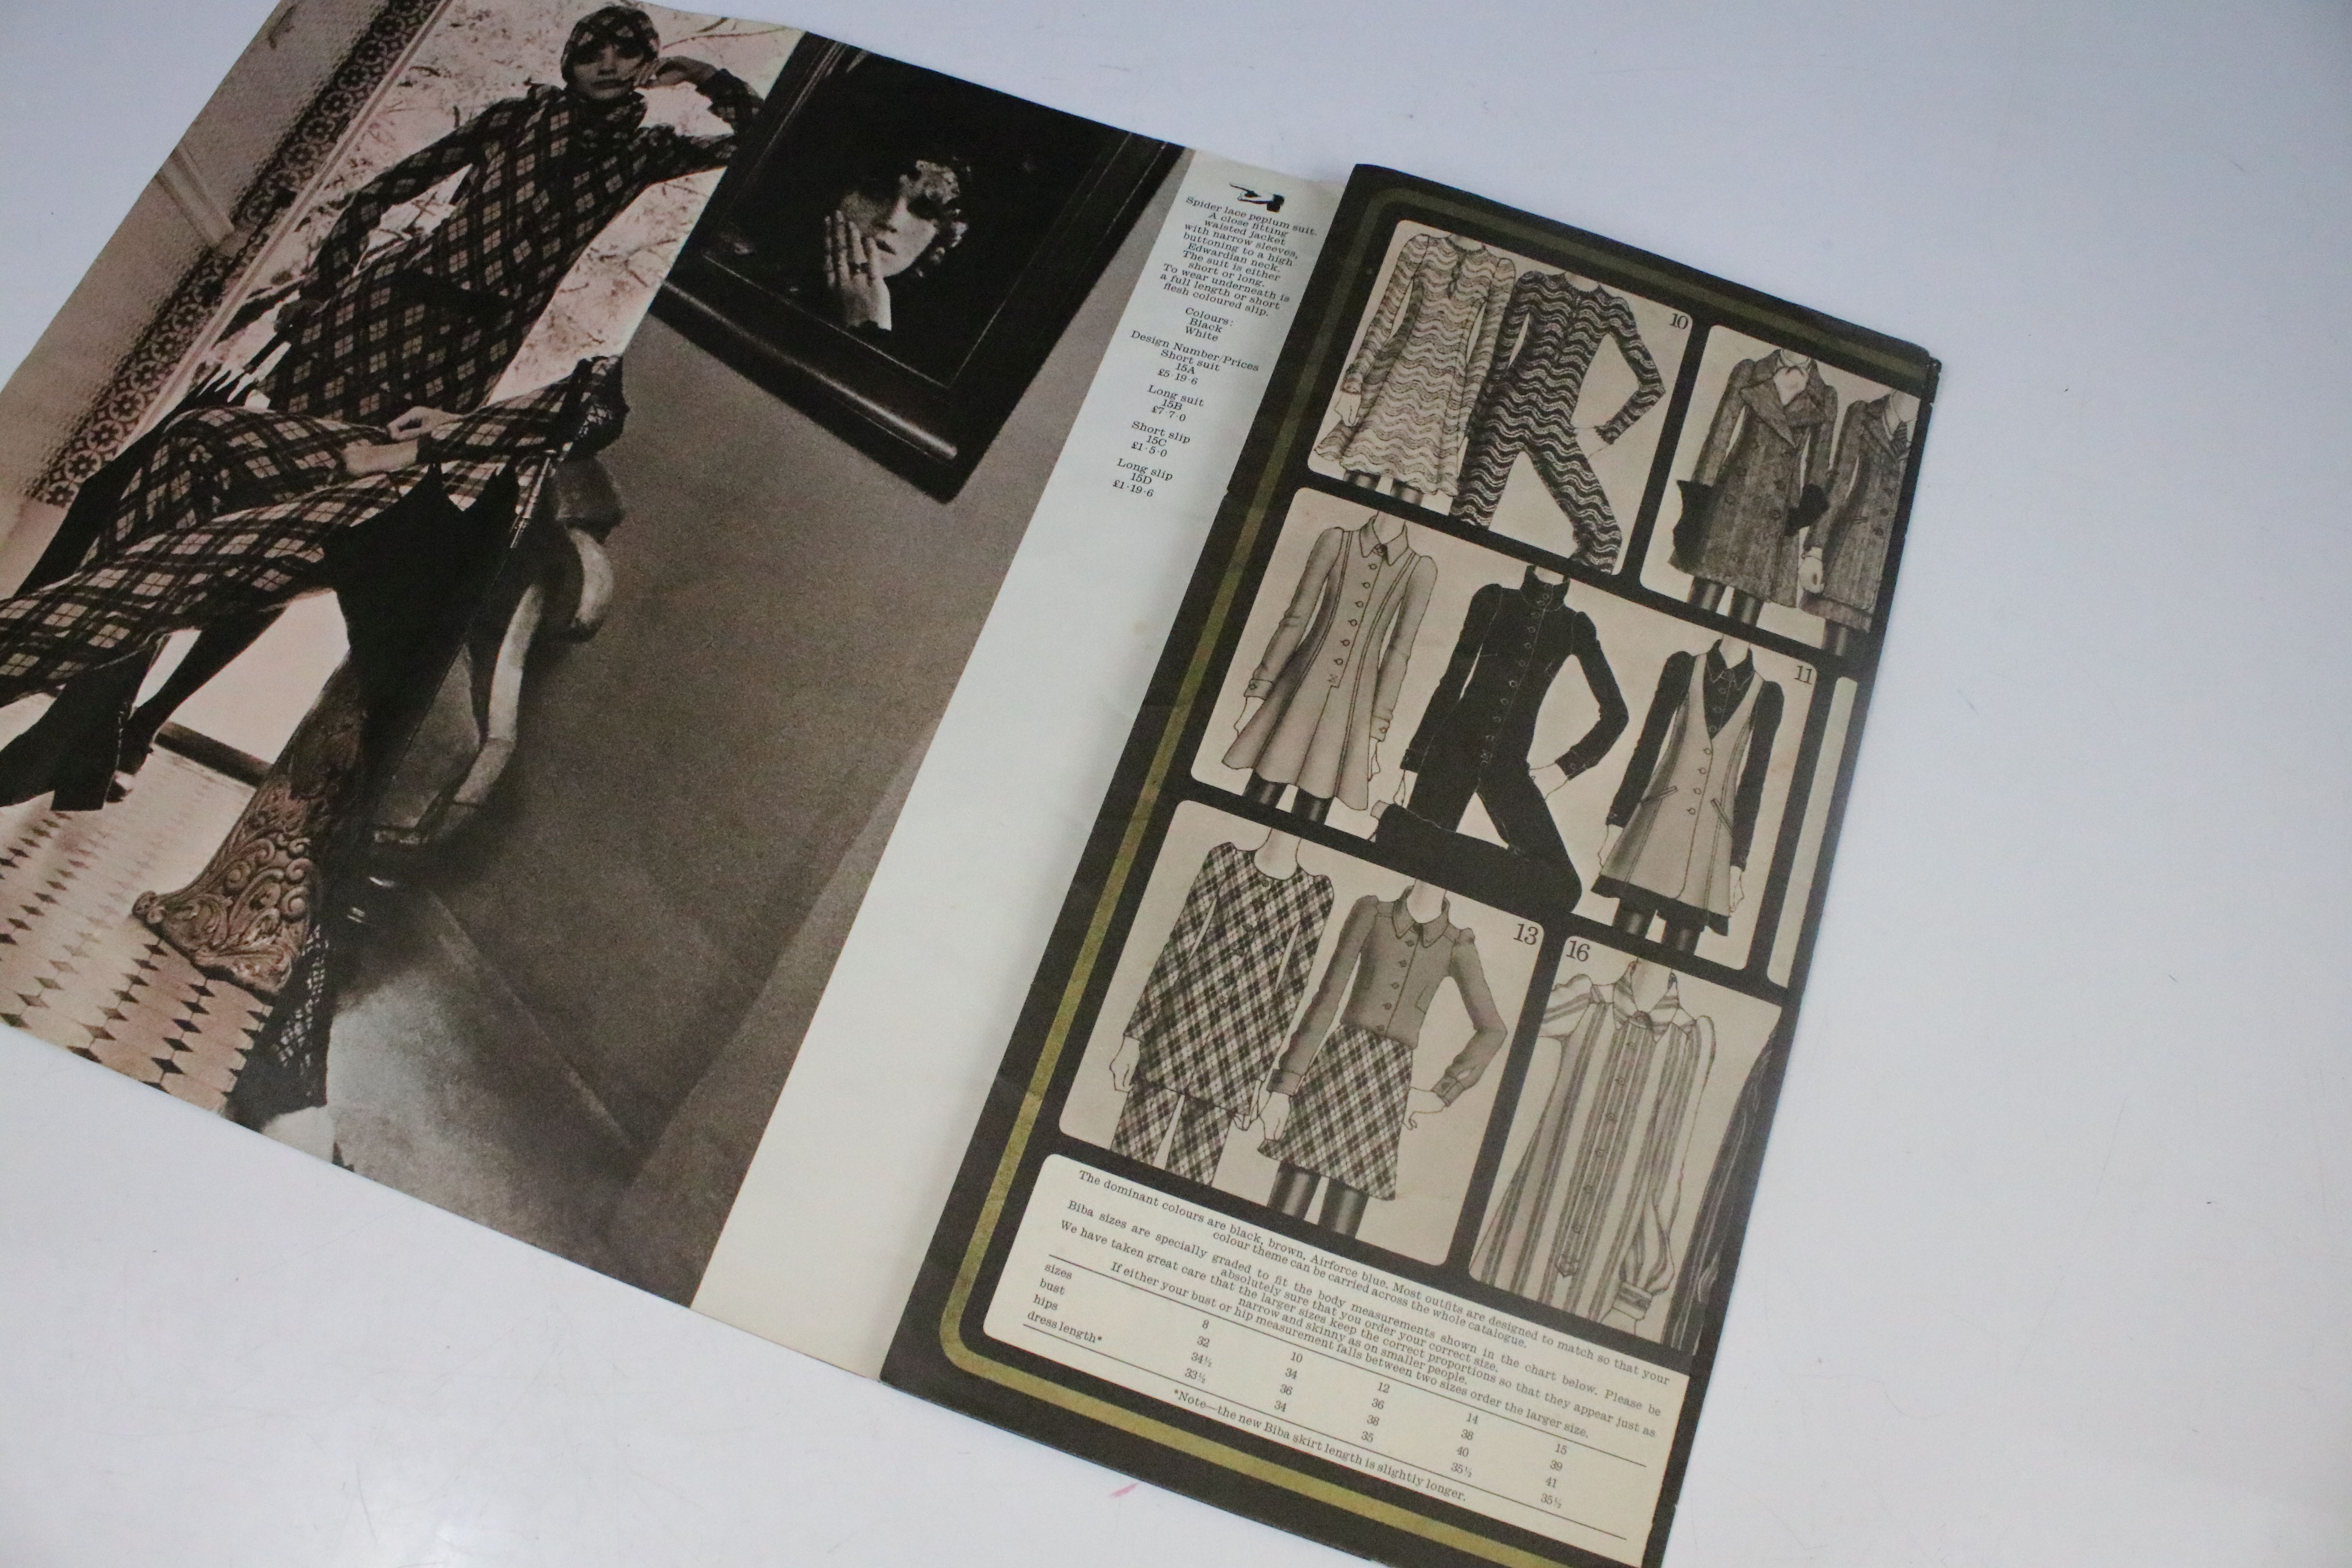 A vintage BIBA clothing catalogue with photography by Sarah Moon. - Image 2 of 3